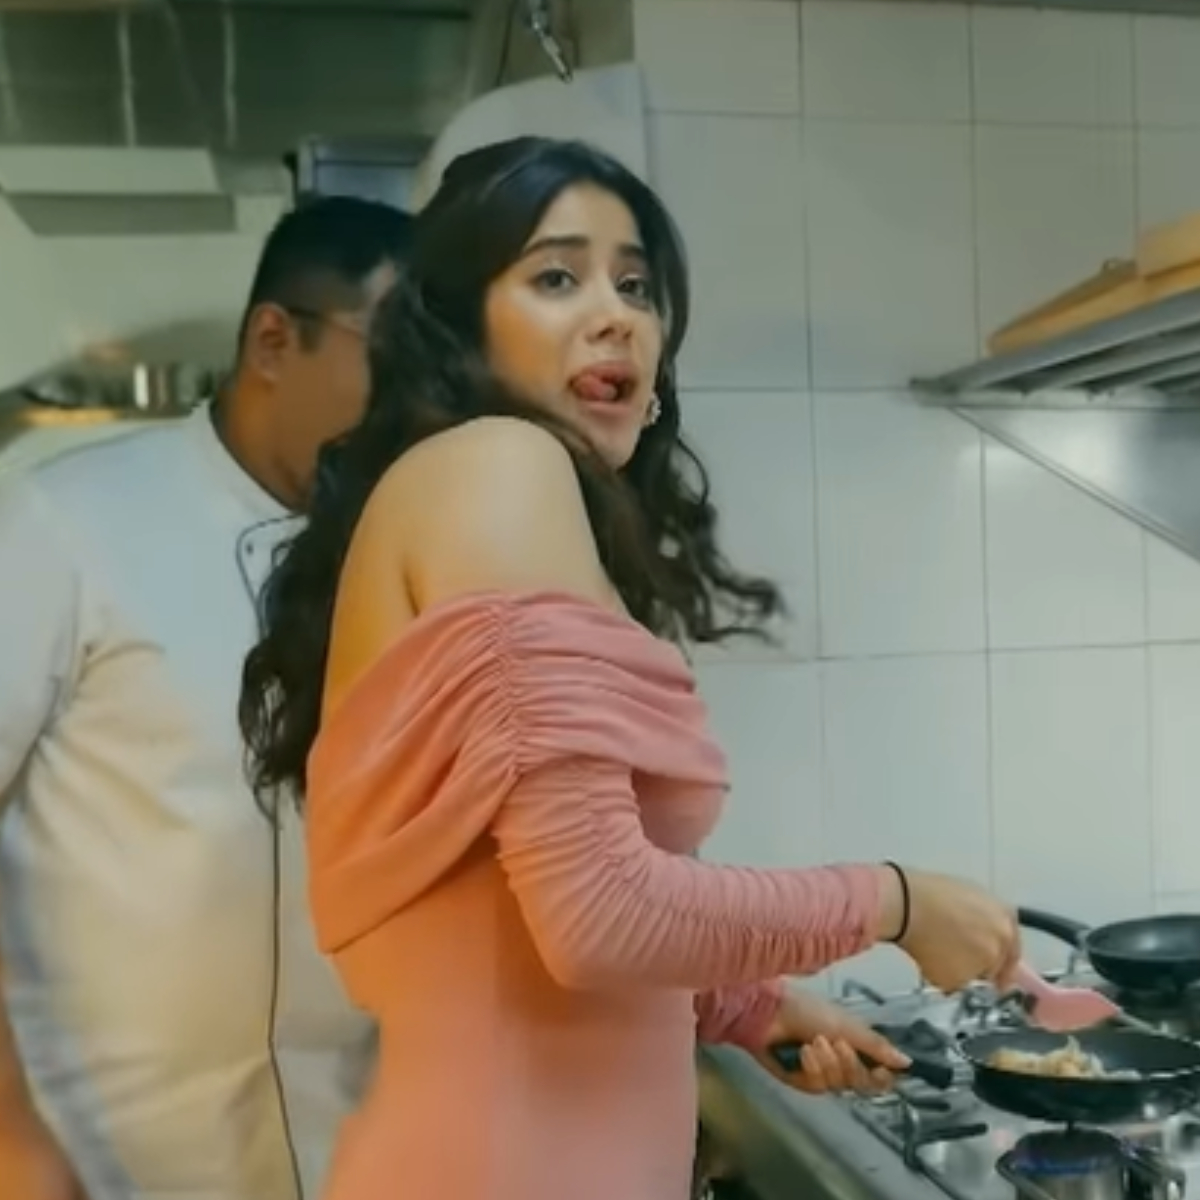 Star Vs Food 2 Review Ep 1: Janhvi Kapoor's tryst in the kitchen is delicious enough to be savoured